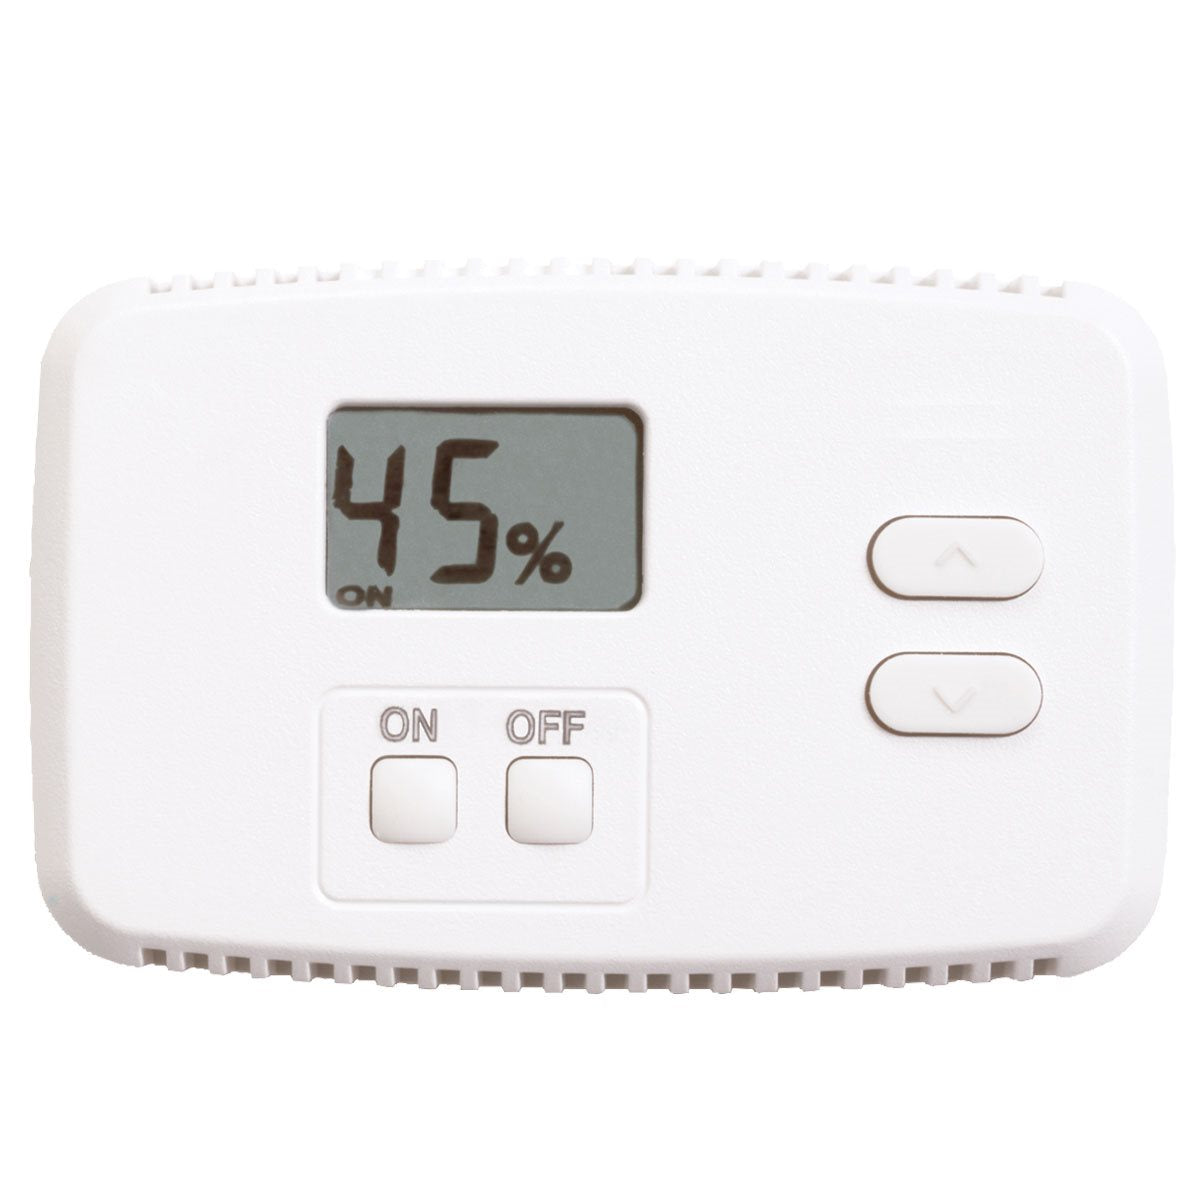 Product Image:Anden A76 Digital Dehumidifier Controller For 200 / 300 Pints